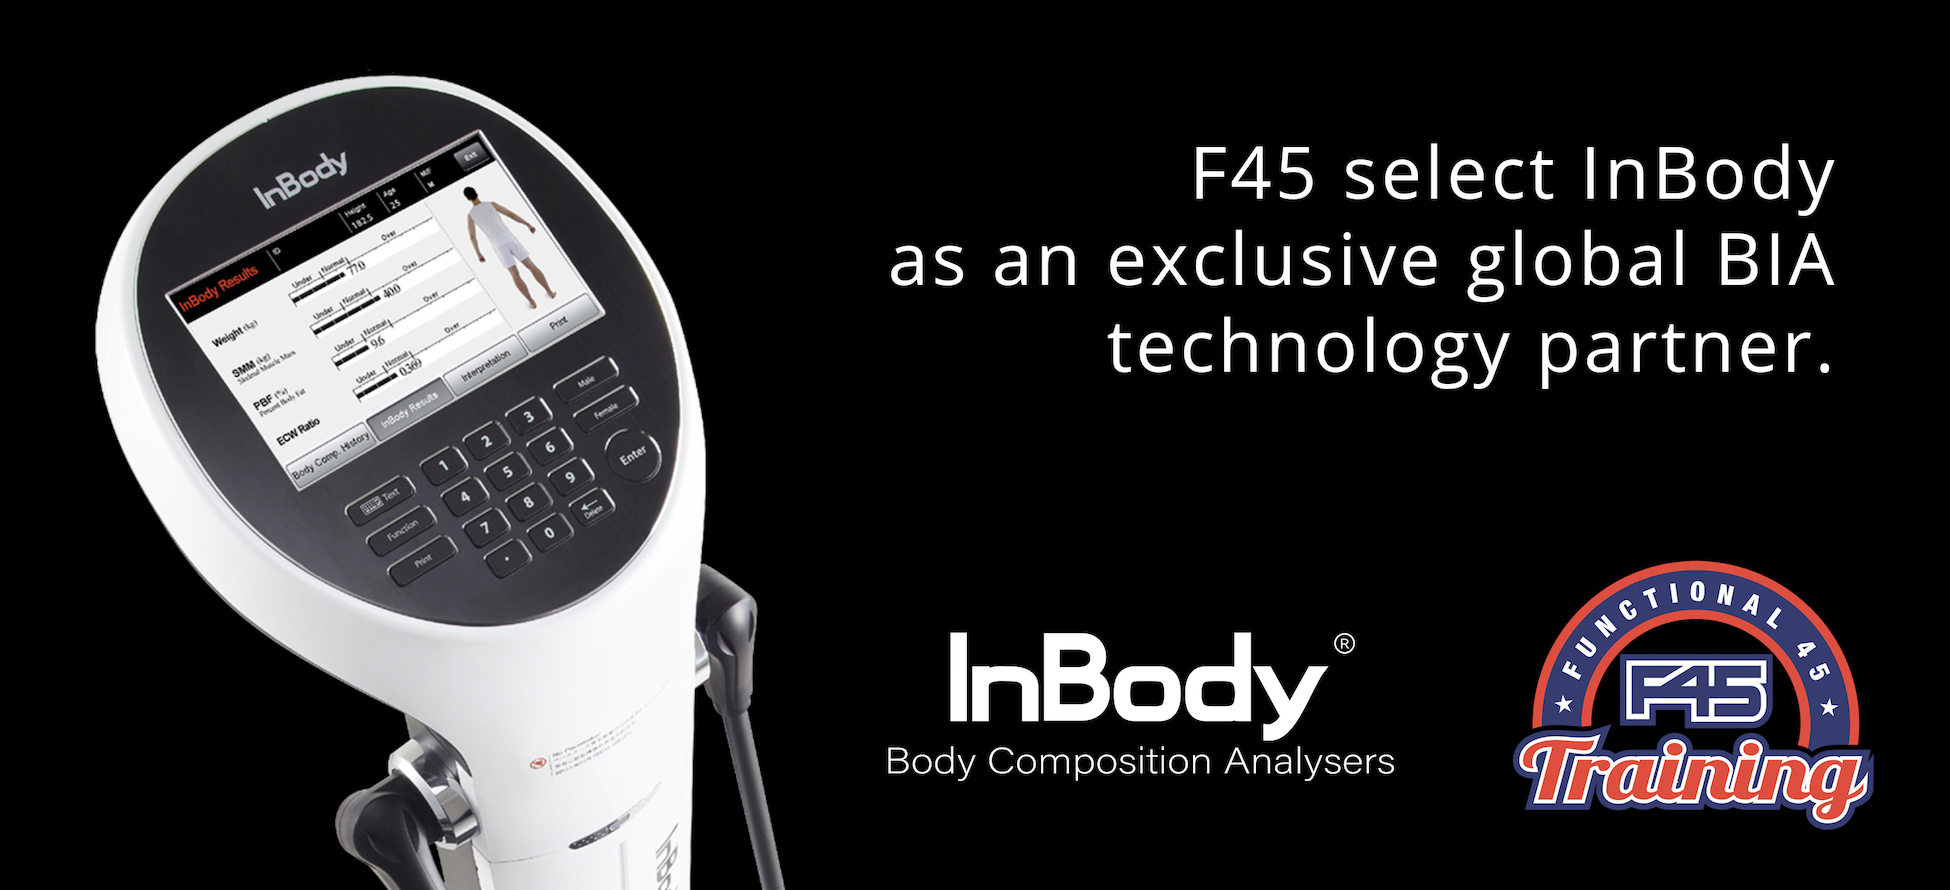 F45 select InBody as an exclusive global BIA device partner.